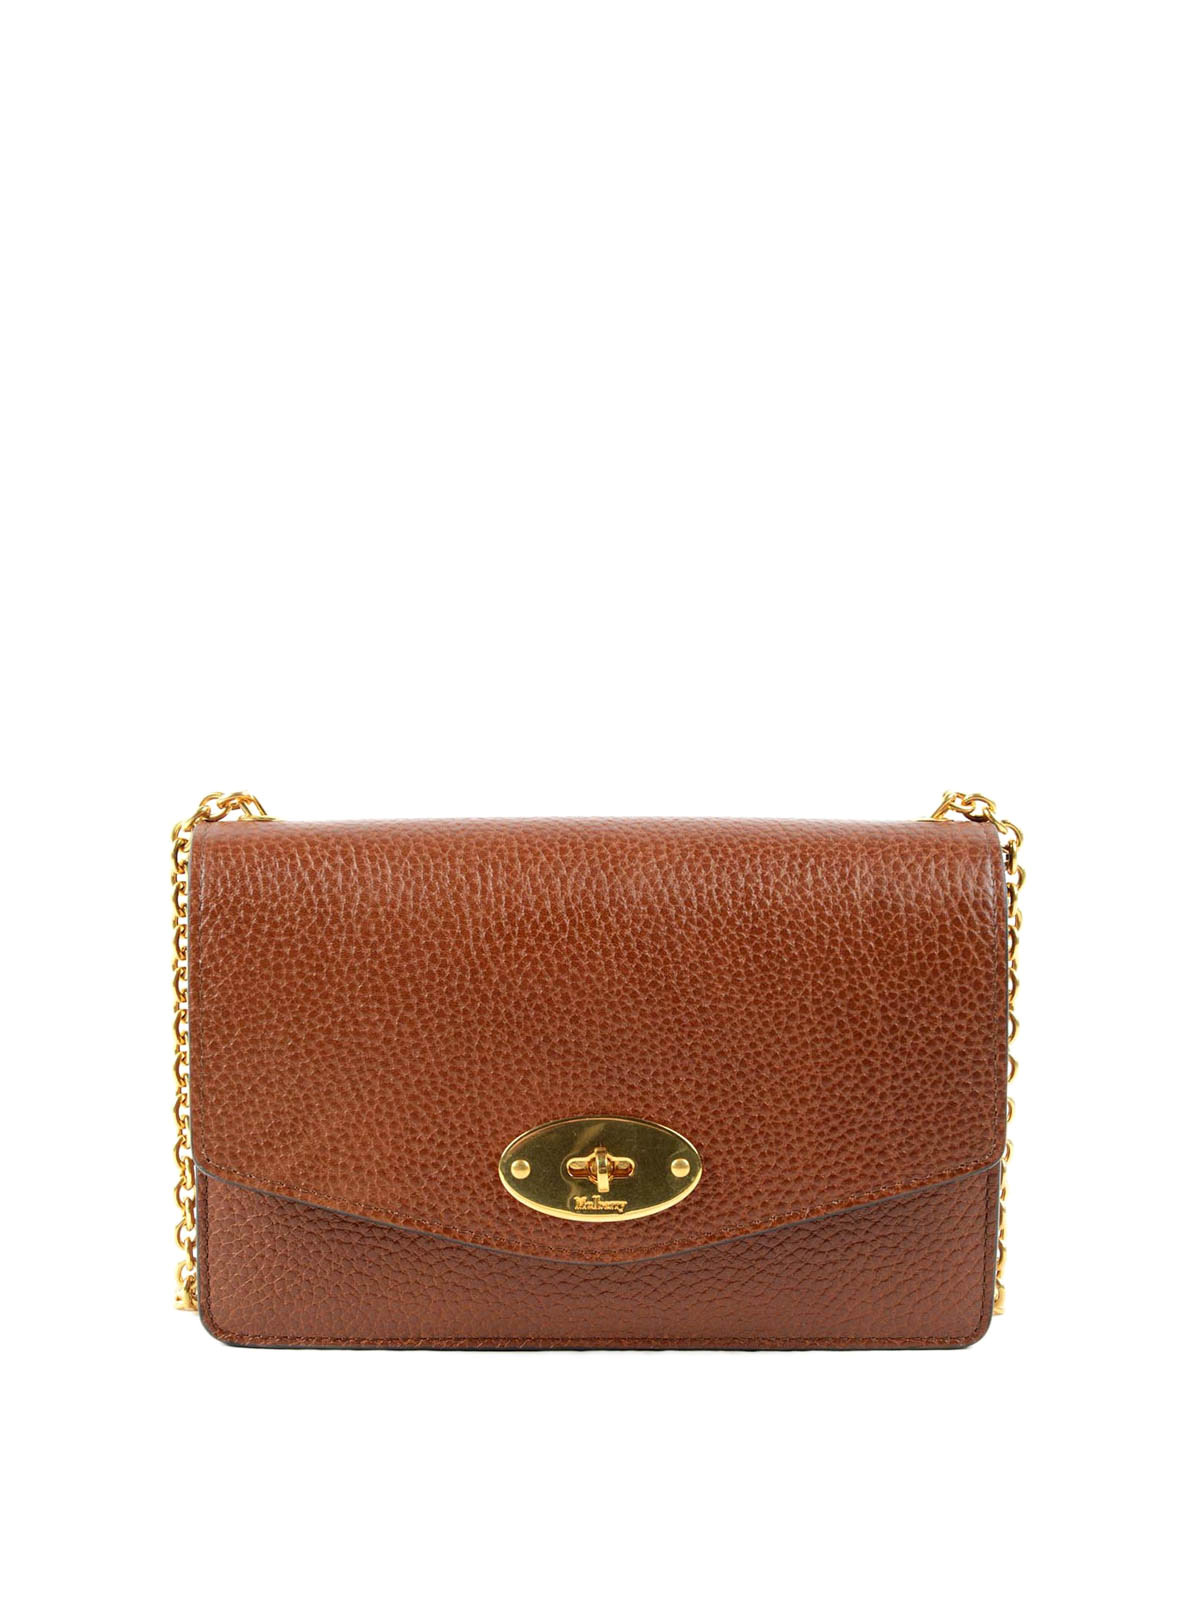 Cross body bags Mulberry - Darley leather small crossbody bag